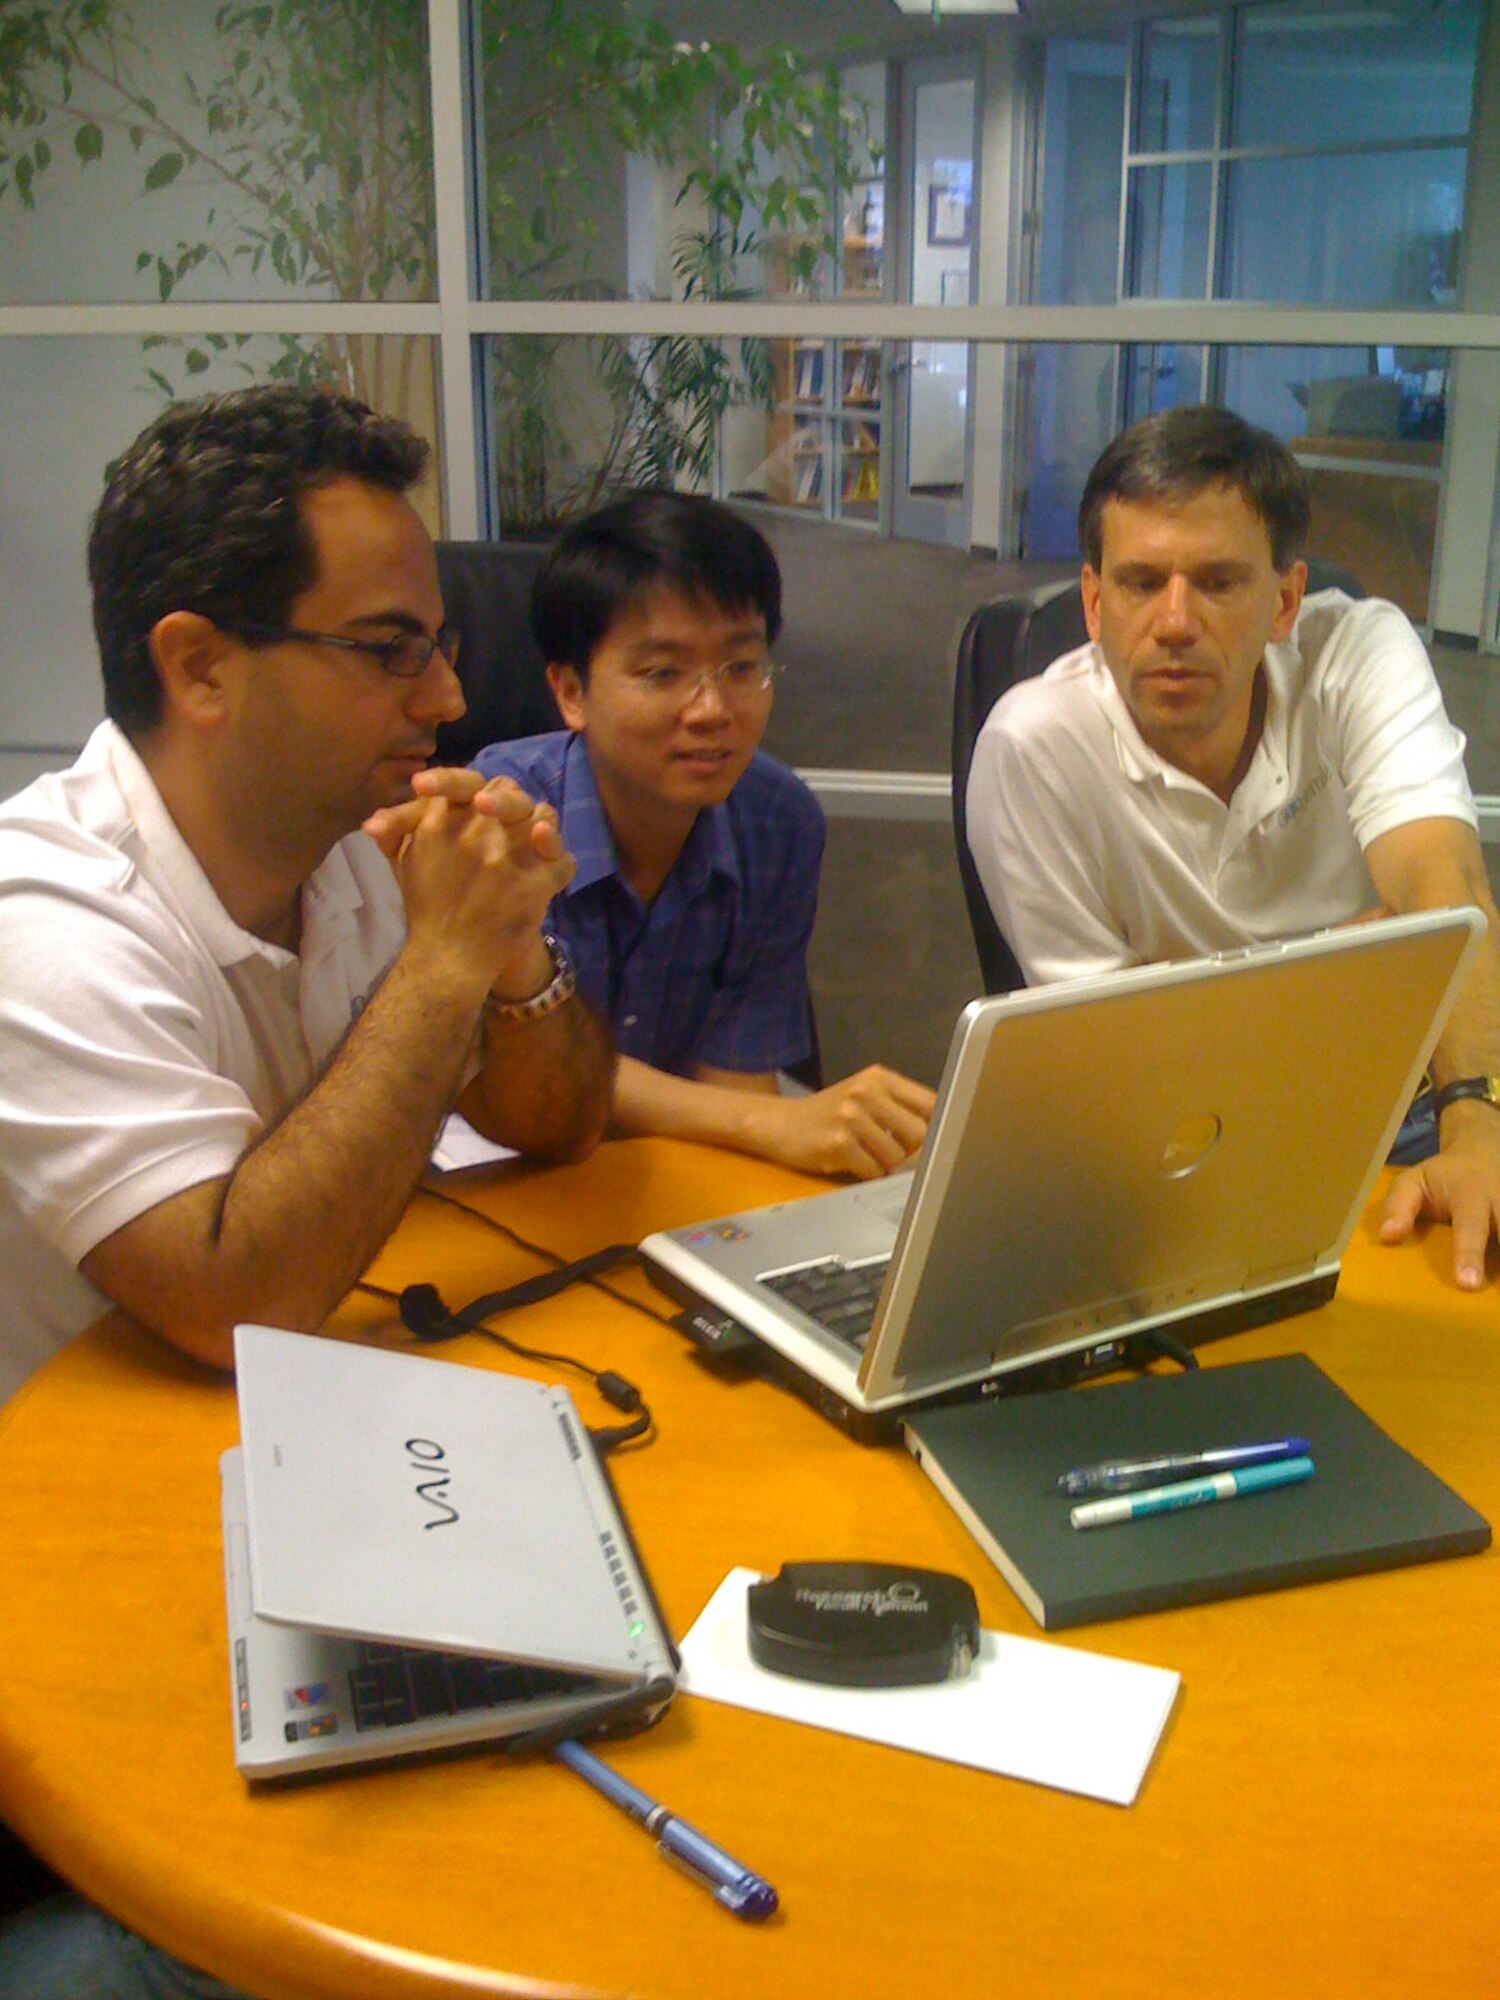 Basic research funding from the Air Force Office of Scientific Research (AFOSR) has led to the development of software for aligning maps with satellite imagery called MapStrata. Pictured above, Cyrus Shahabi (left), Jason Chen (center), and Craig Knoblock (right) from Geosemble Technologies review the latest version. (Image courtesy of Dr. Craig Knoblock, University of Southern California, Information Sciences Institute)